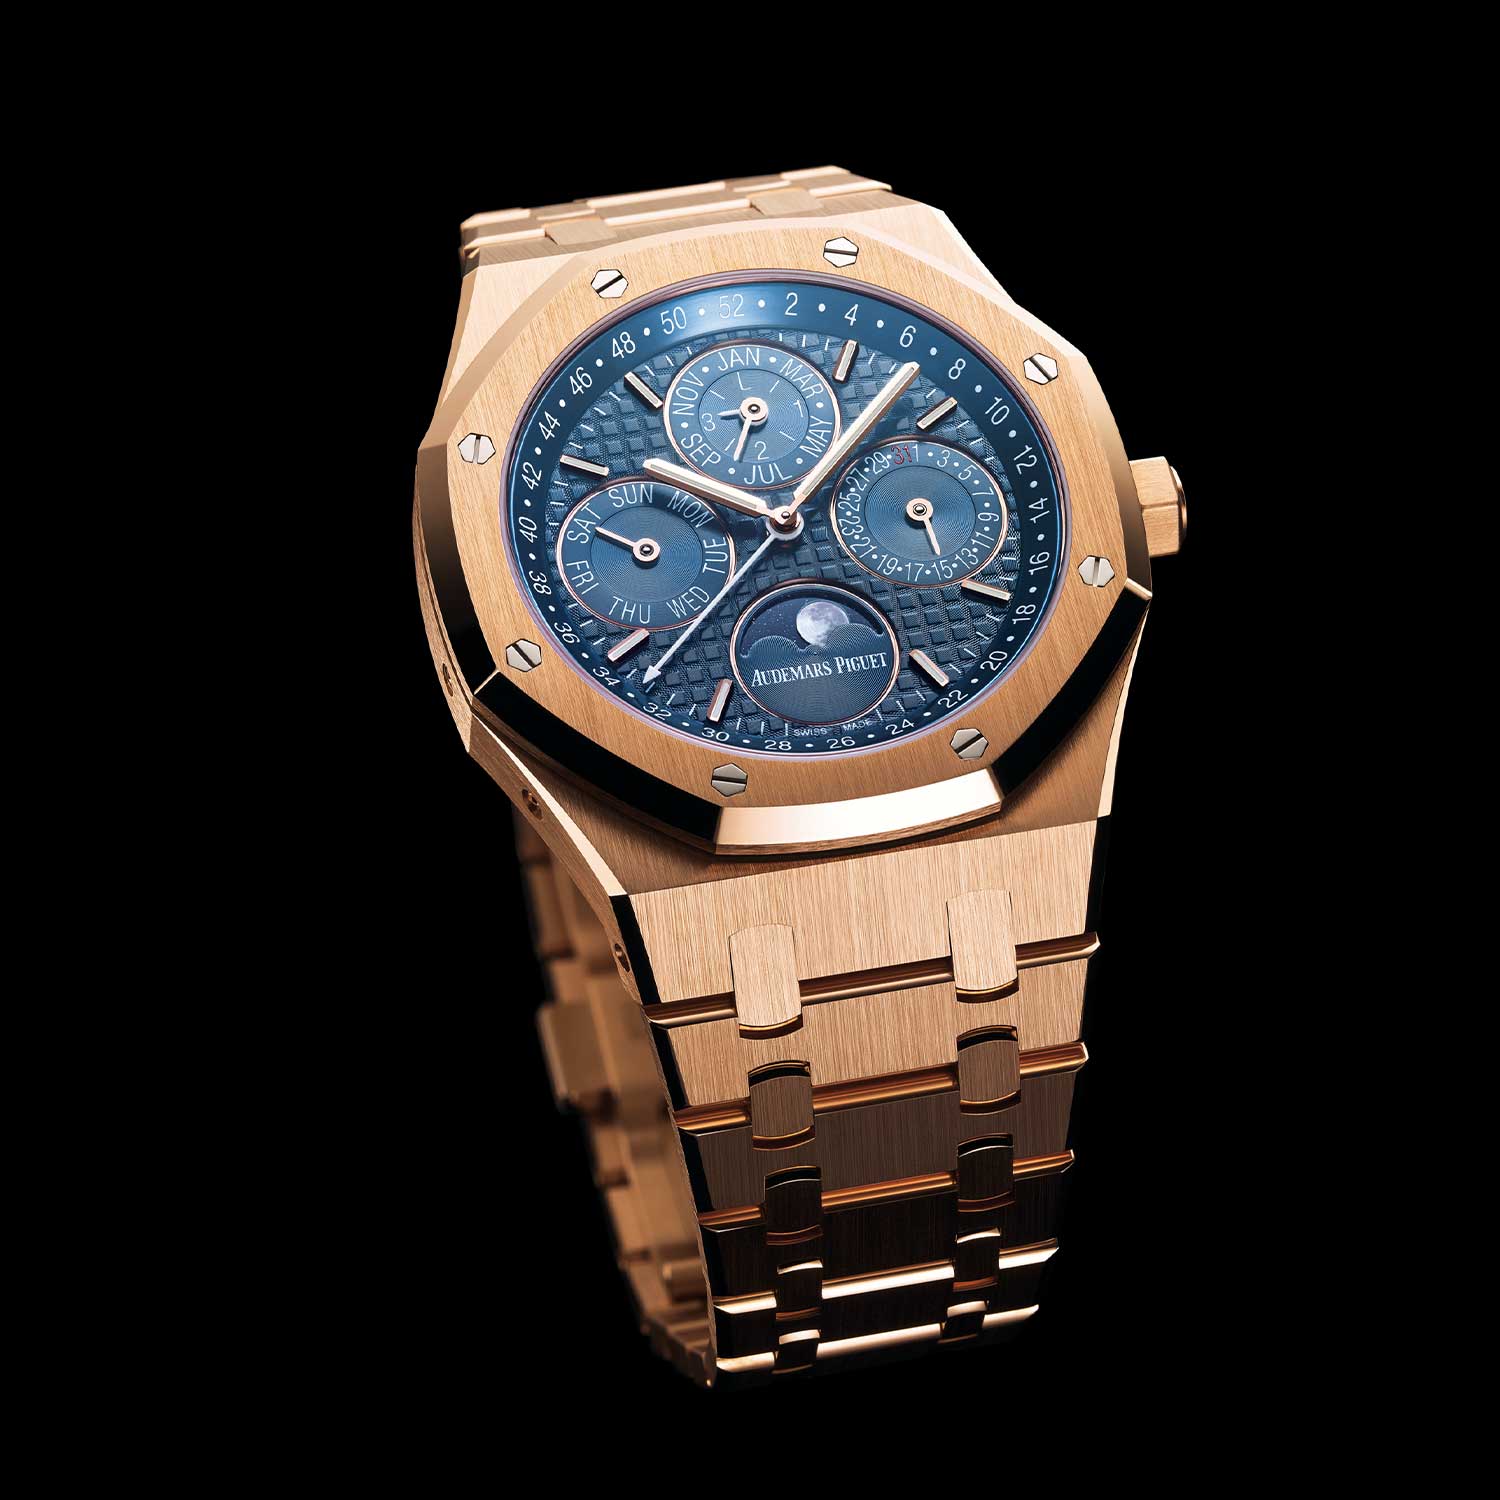 The Royal Oak Perpetual Calendar ref. 26574OR in rose gold with a blue dial, launched in 2015